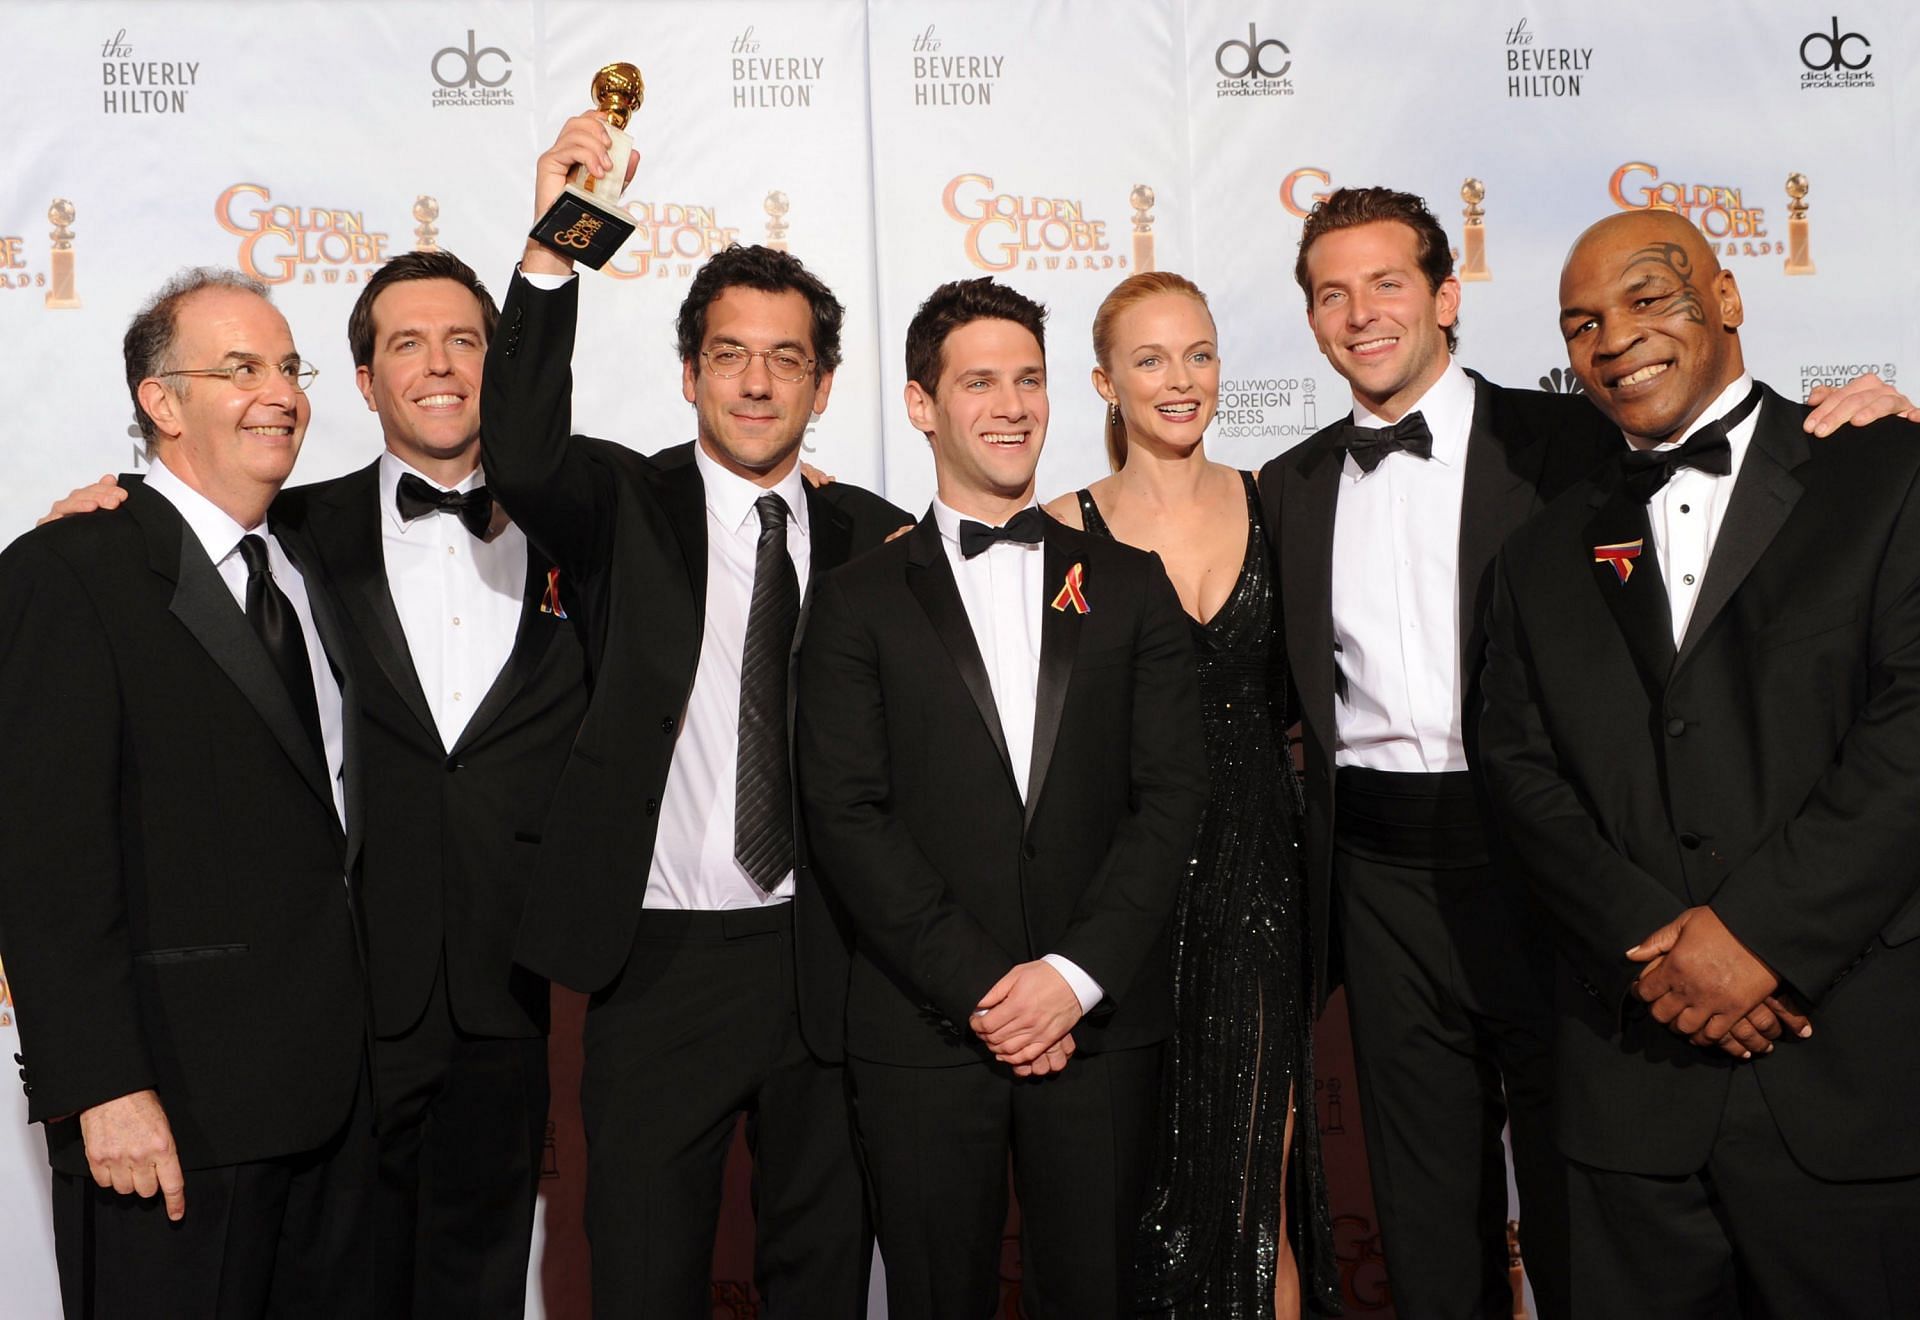 Mike Tyson (extreme right) at the 67th Annual Golden Globe Awards [Image Credits: Getty Images]